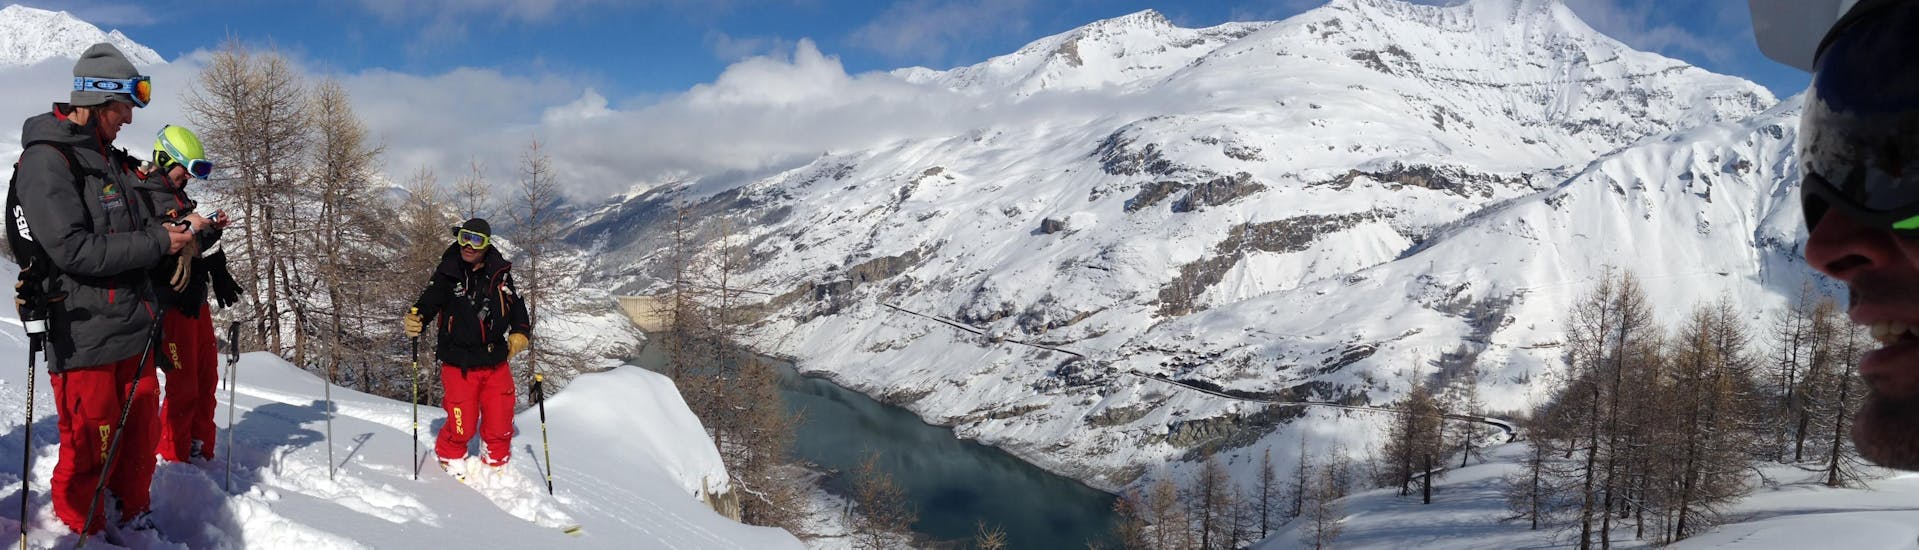 Skiers are overlooking the Tignes Lake during their Off-Piste Skiing Lessons with the ski school Evolution 2 Tignes.